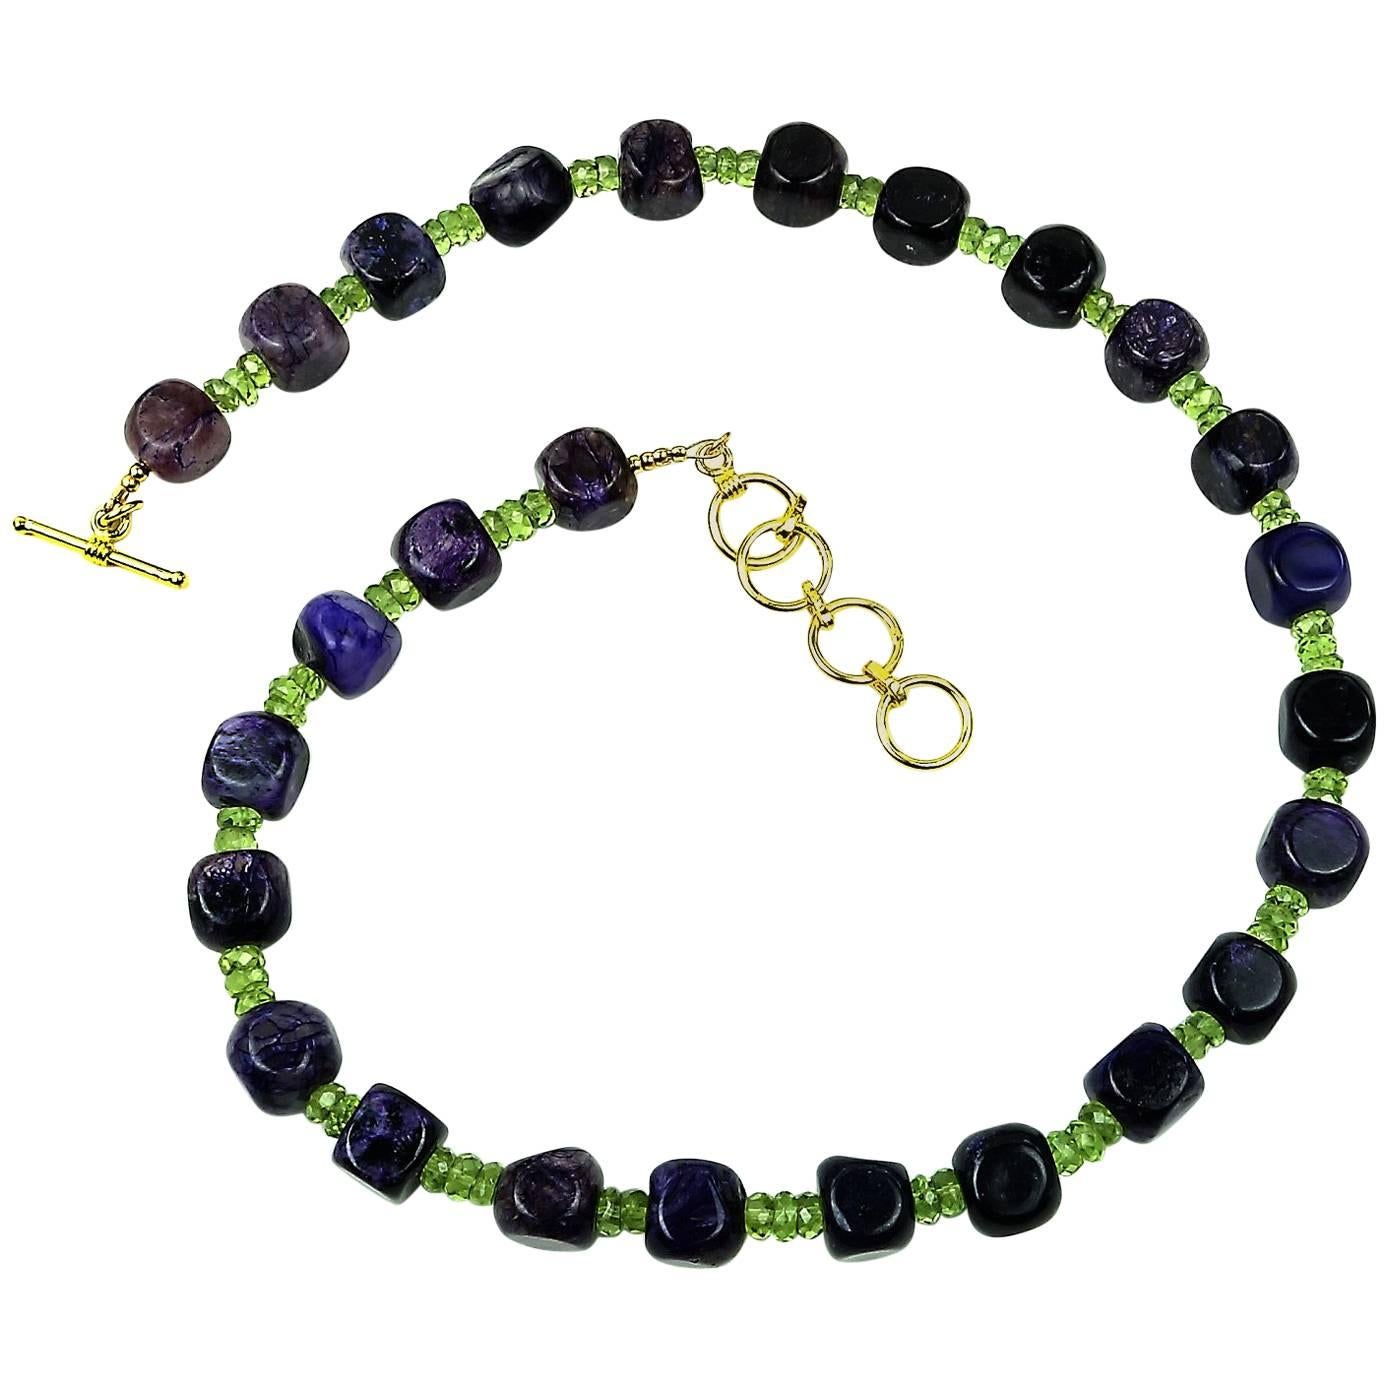 AJD Amethyst Cubes with Peridot accents Necklace February Birthstone